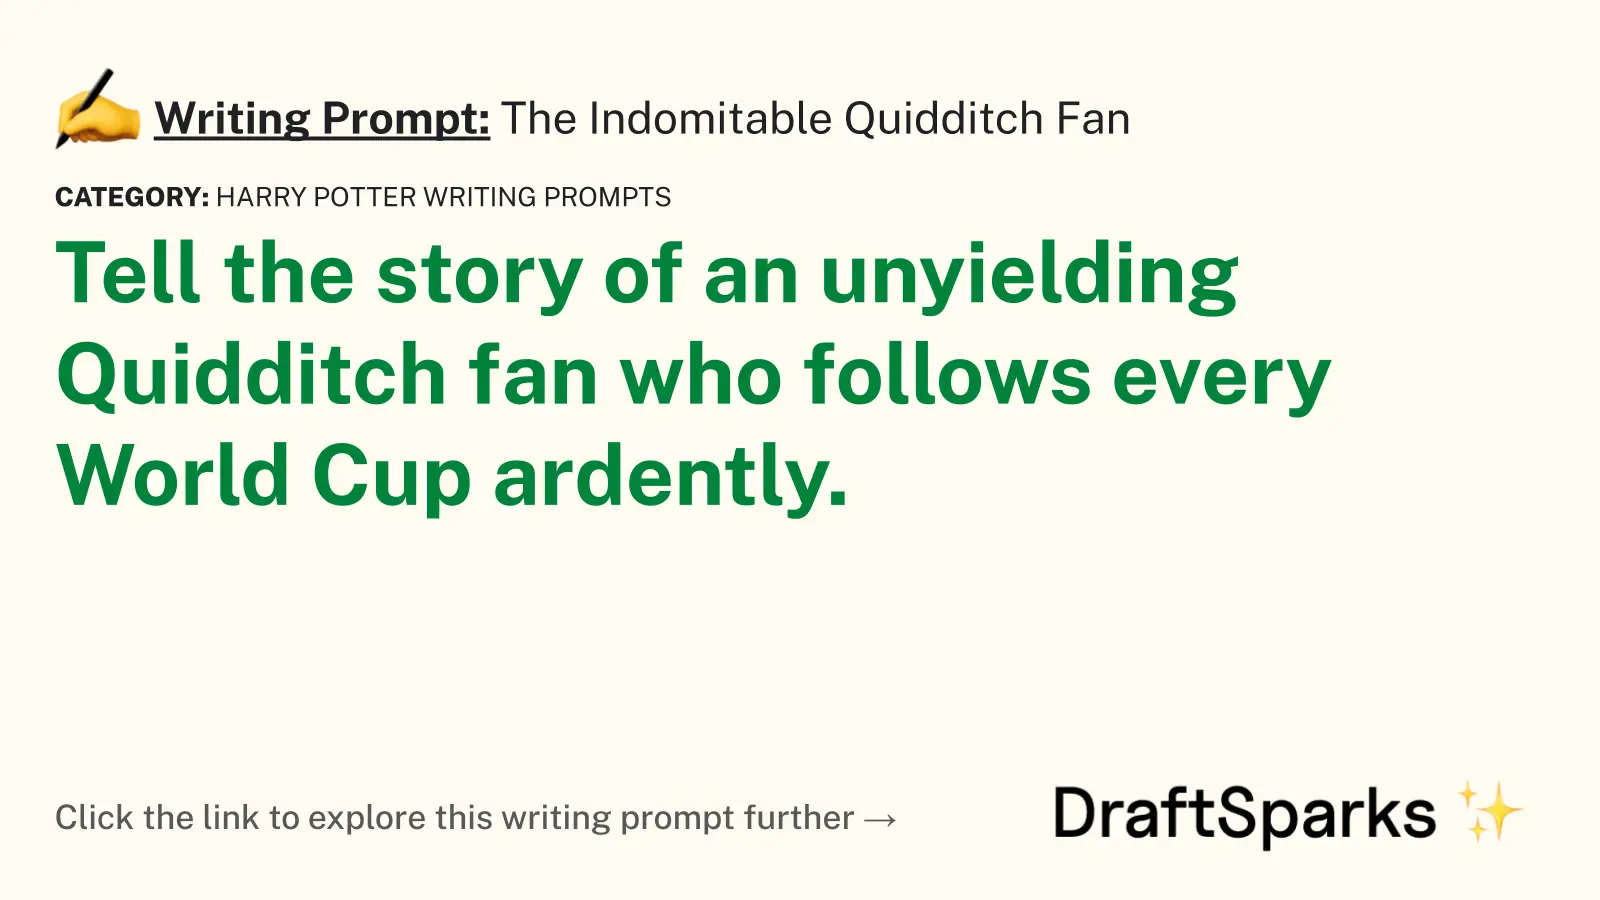 The Indomitable Quidditch Fan